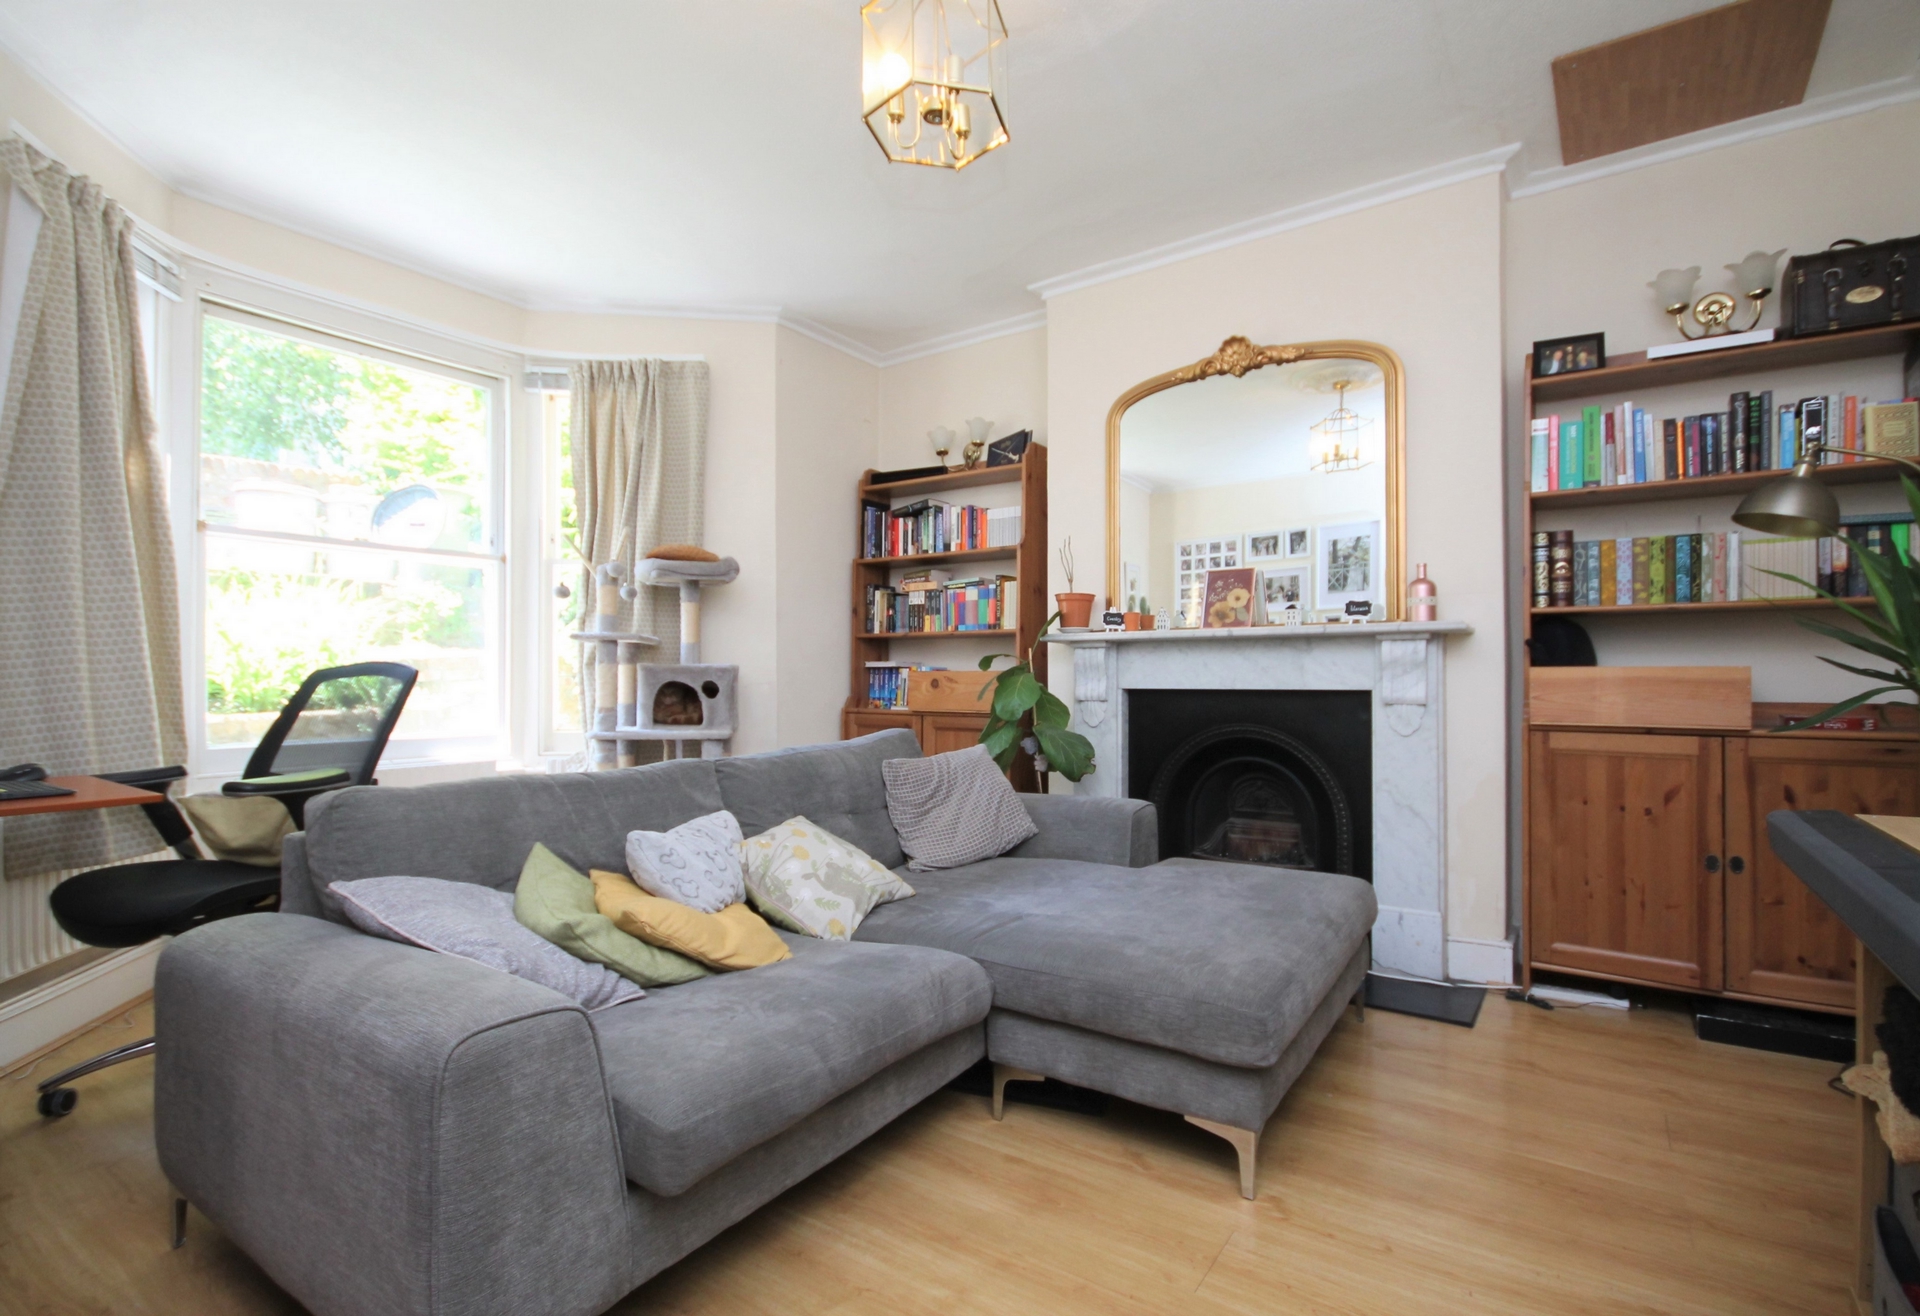 1 Bedroom Flat to rent in Tufnell Park, London, N7